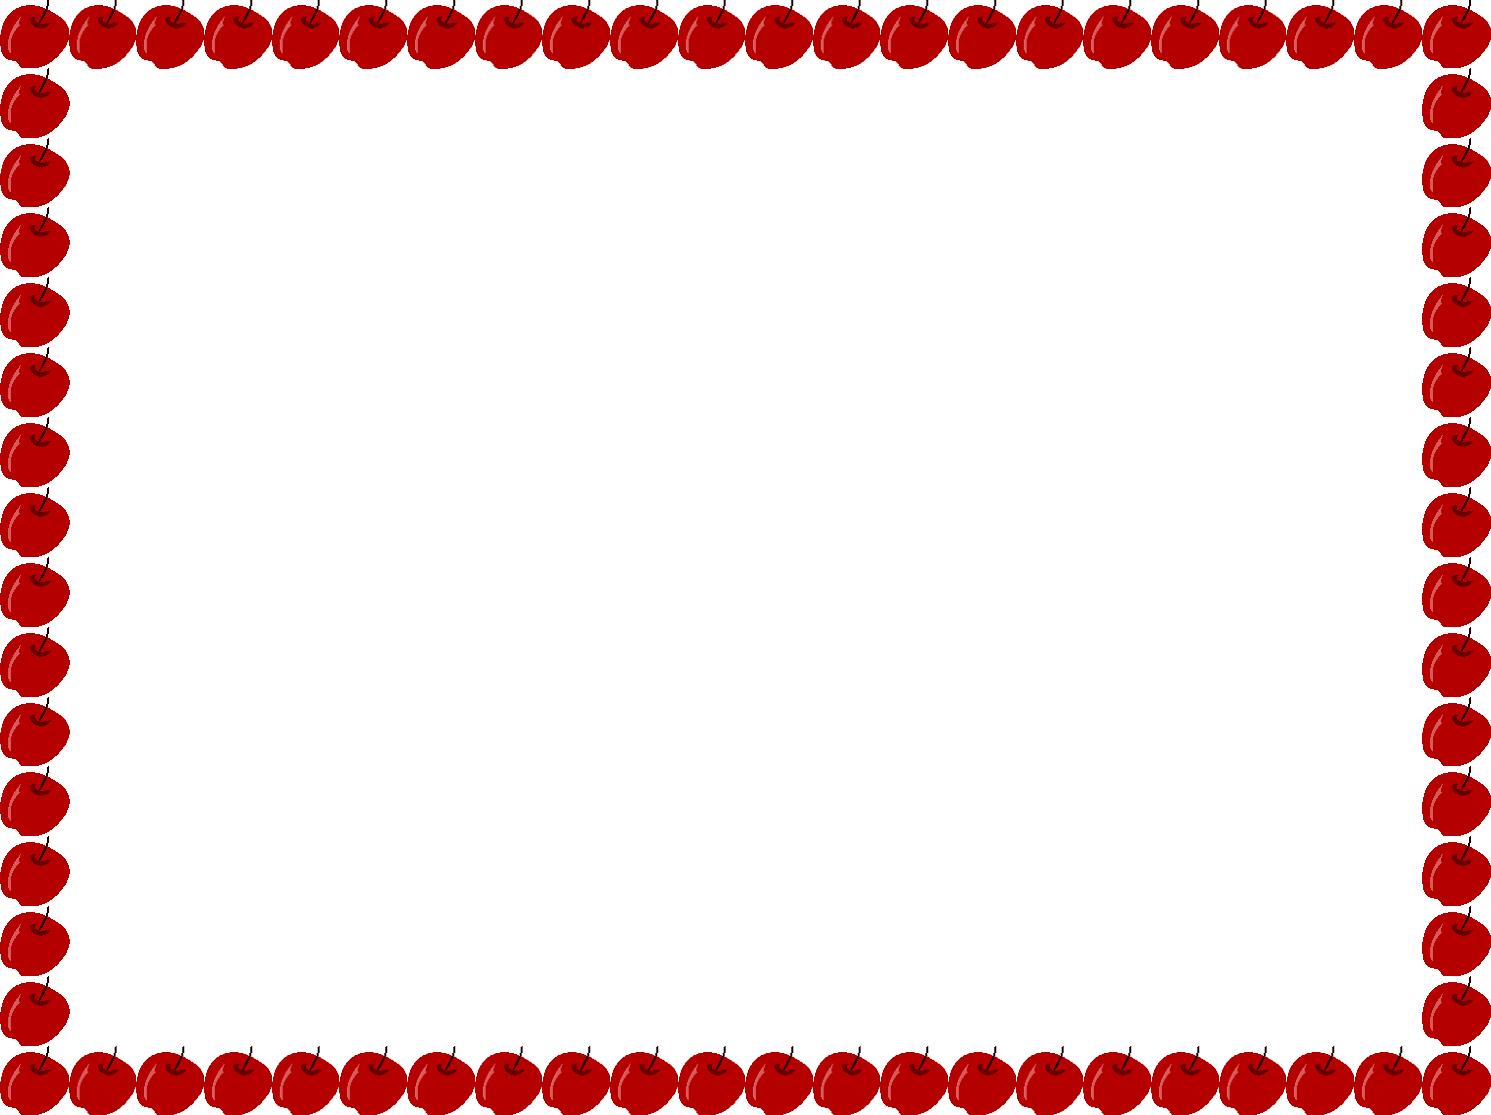 red frame clipart - photo #45